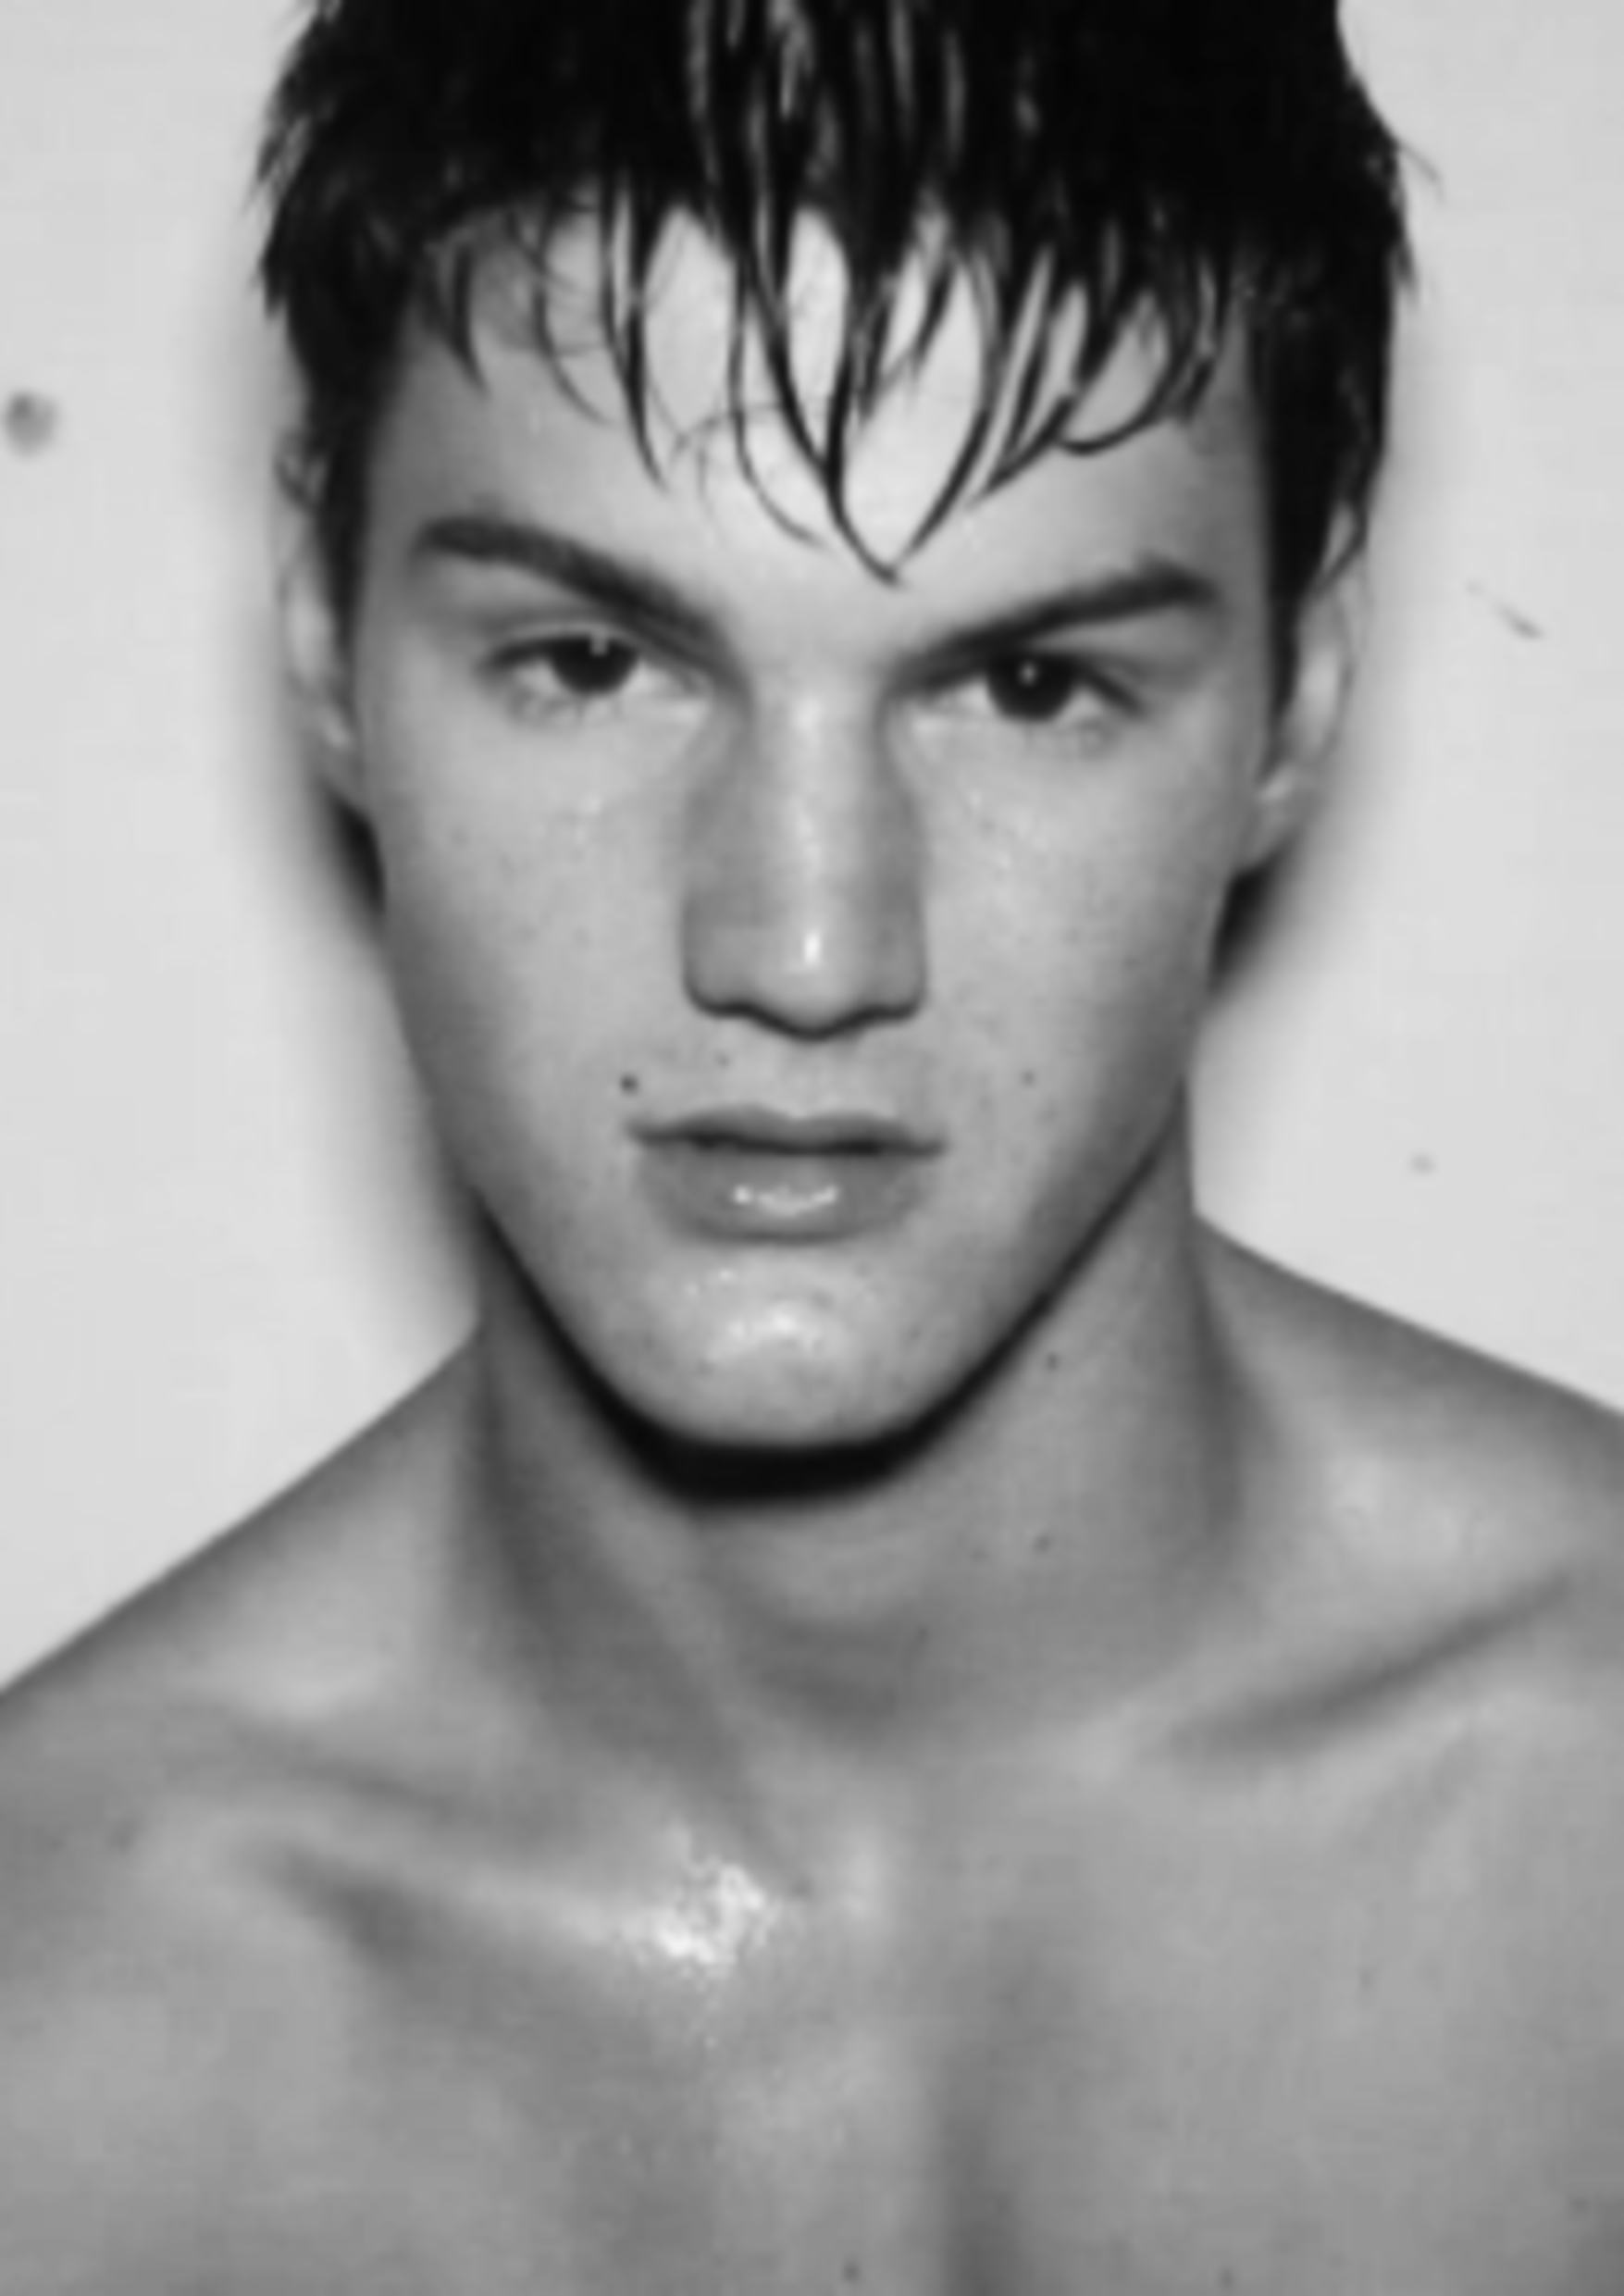 Jacob Files from San Diego at DT Model Management by Ron Wan in Hong Kong.